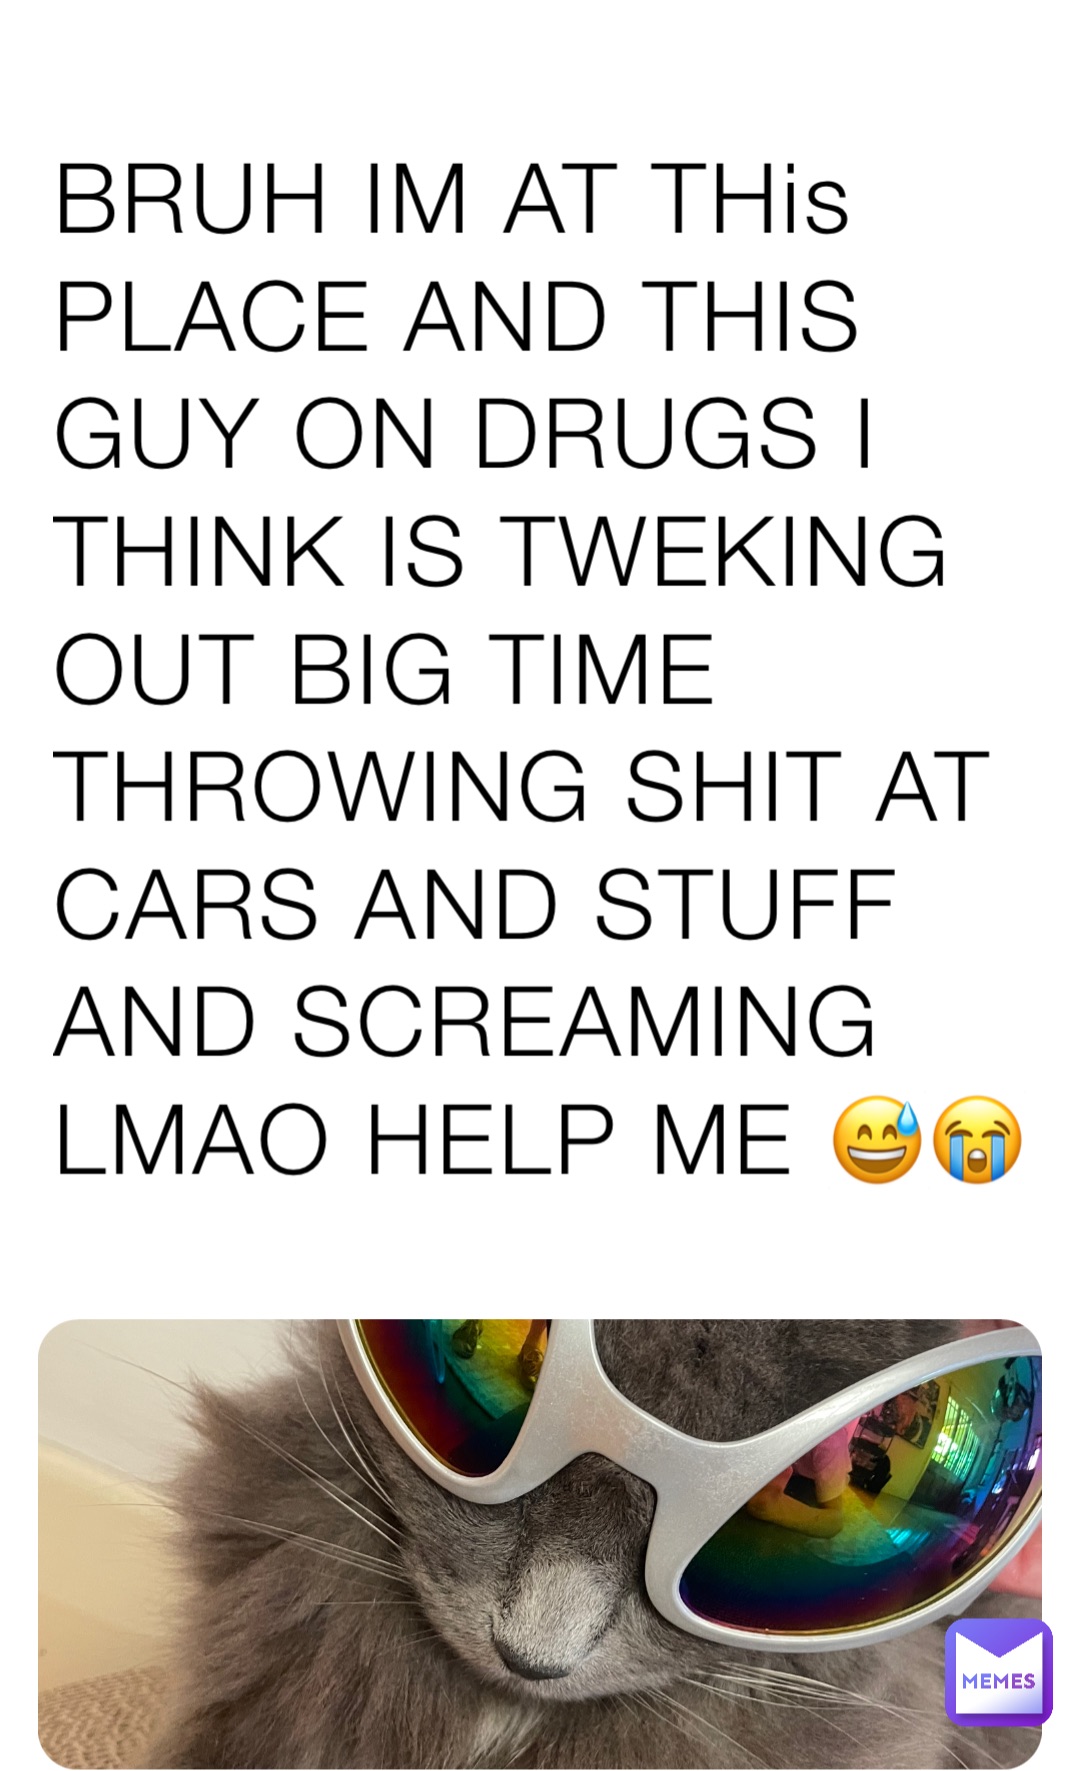 BRUH IM AT THis PLACE AND THIS GUY ON DRUGS I THINK IS TWEKING OUT BIG TIME THROWING SHIT AT CARS AND STUFF AND SCREAMING LMAO HELP ME 😅😭